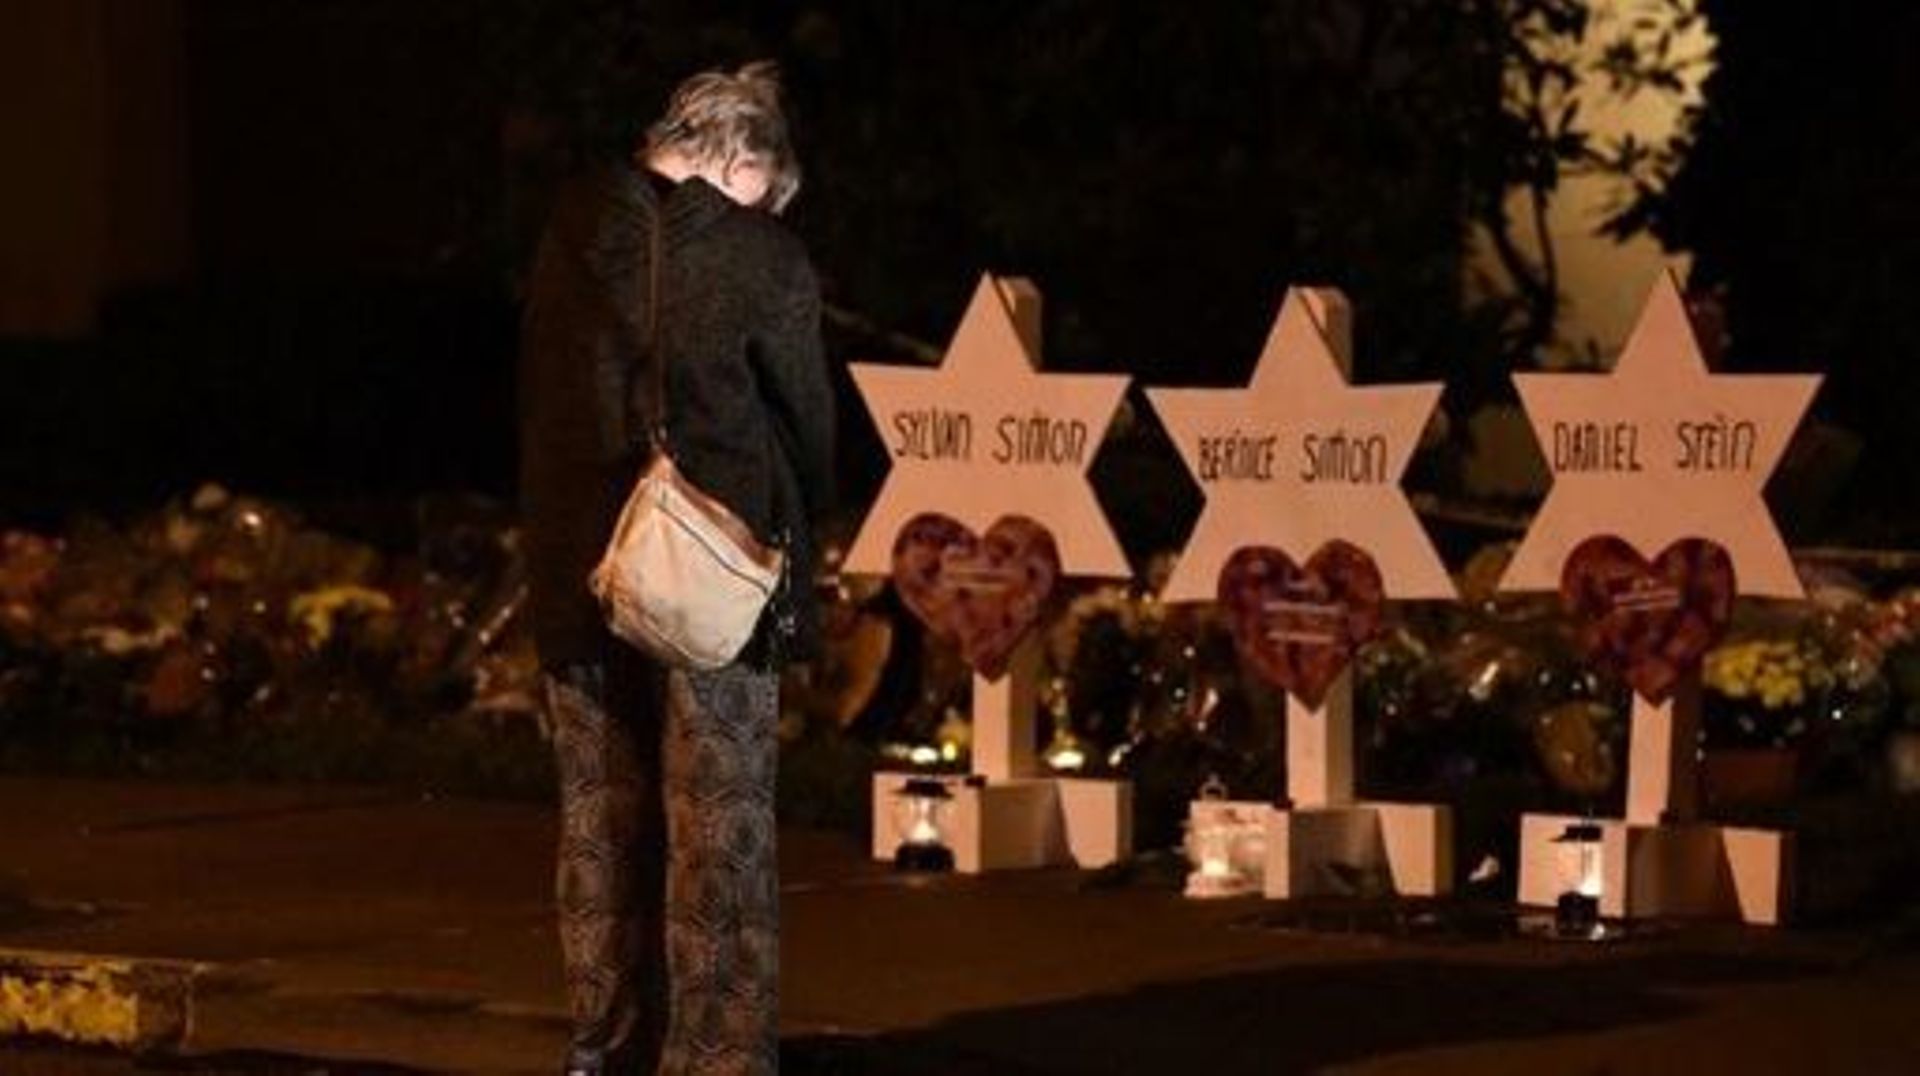 A woman bows her head in front of a memorial on October 28, 2018, at the Tree of Life synagogue after a shooting there left 11 people dead in the Squirrel Hill neighborhood of Pittsburgh on October 27. A man suspected of bursting into a Pittsburgh synagog